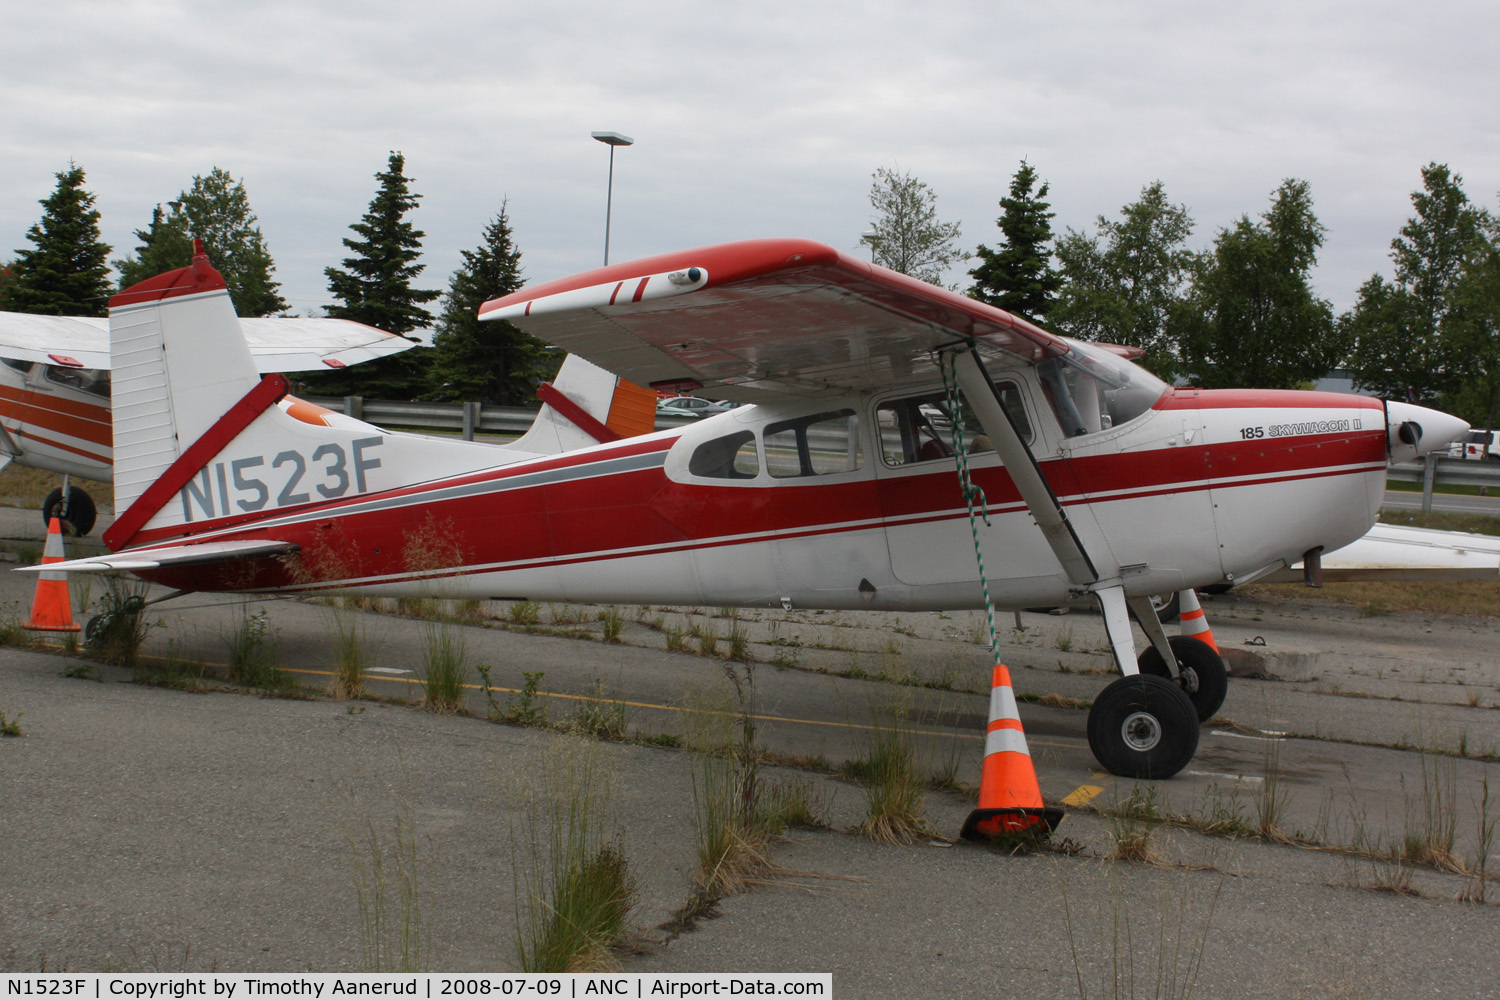 N1523F, 1965 Cessna 185D Skywagon C/N 185-0866, General Aviation parking area at Anchorage